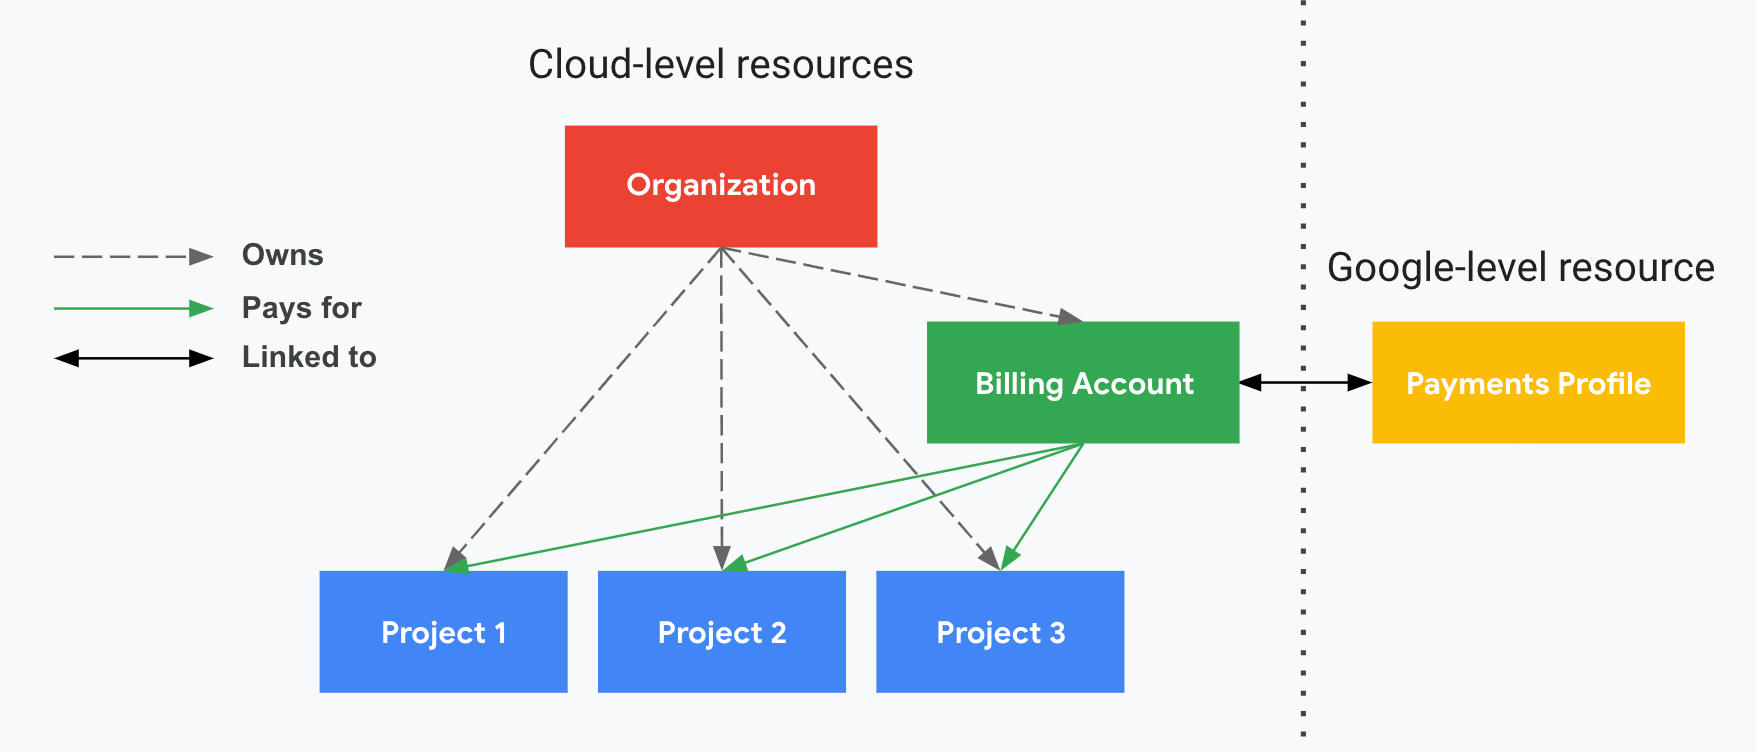 describes how projects relate to Cloud Billing and your payments profile. One side shows your Cloud-level resources (Cloud Billing account and associated projects) and the other side, divided by a vertical dotted line, shows your Google-level resource (a payments profile). Your projects are paid for by your Cloud Billing account, which is linked to your payments profile.